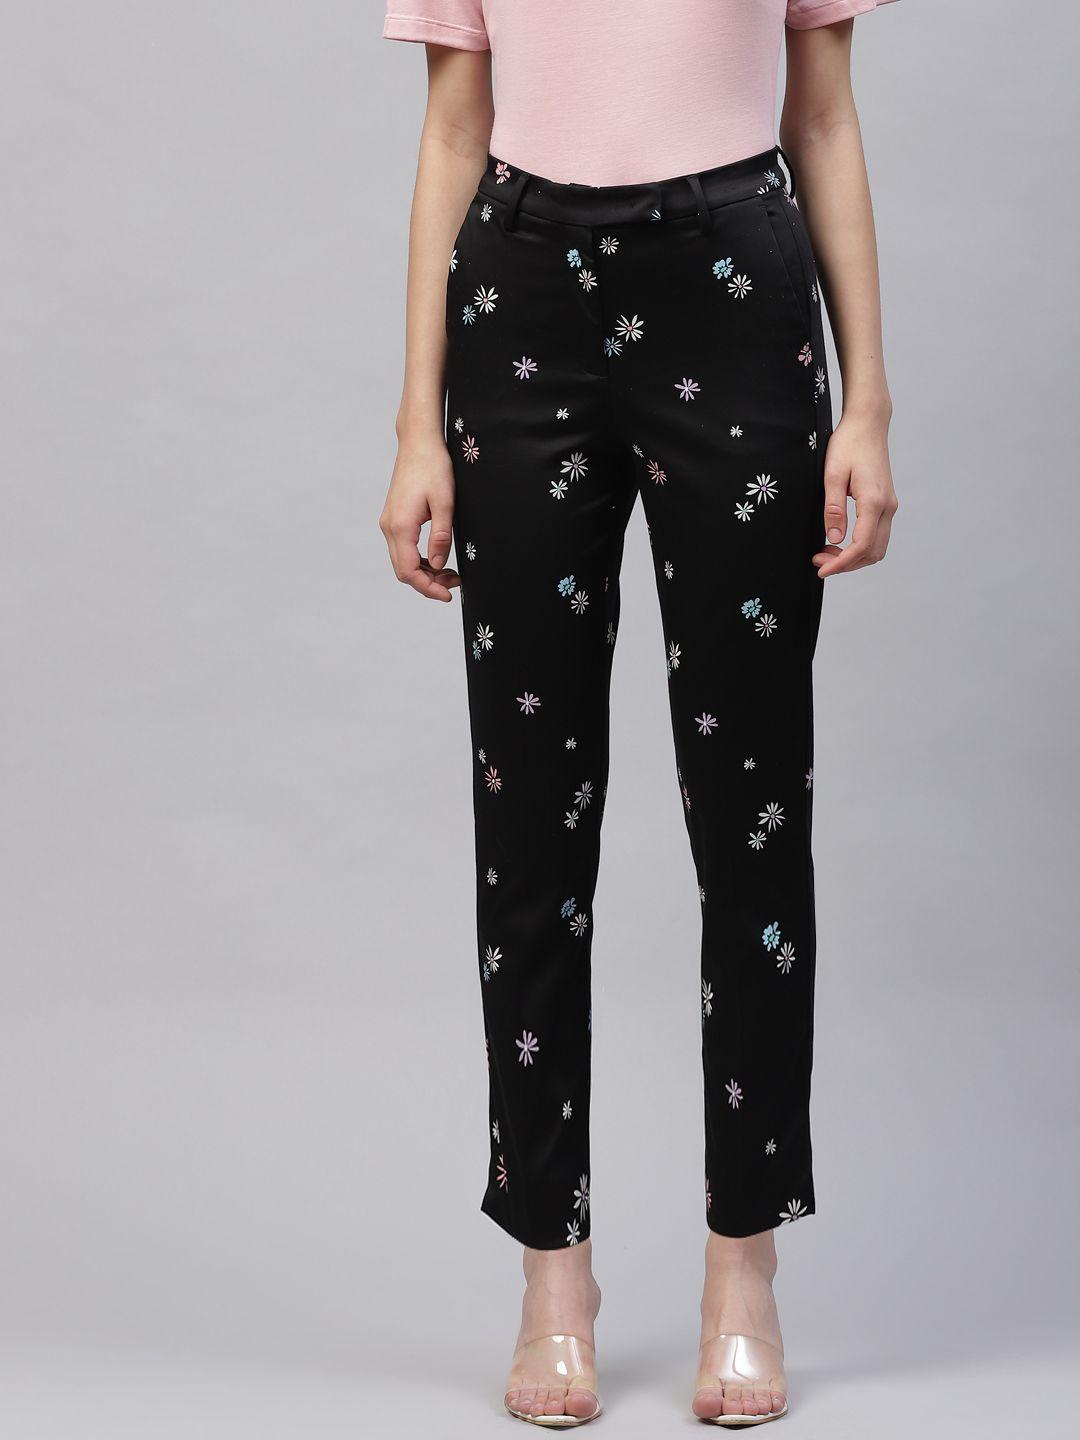 marks-&-spencer-women-black-&-white-floral-print-slim-fit-trousers